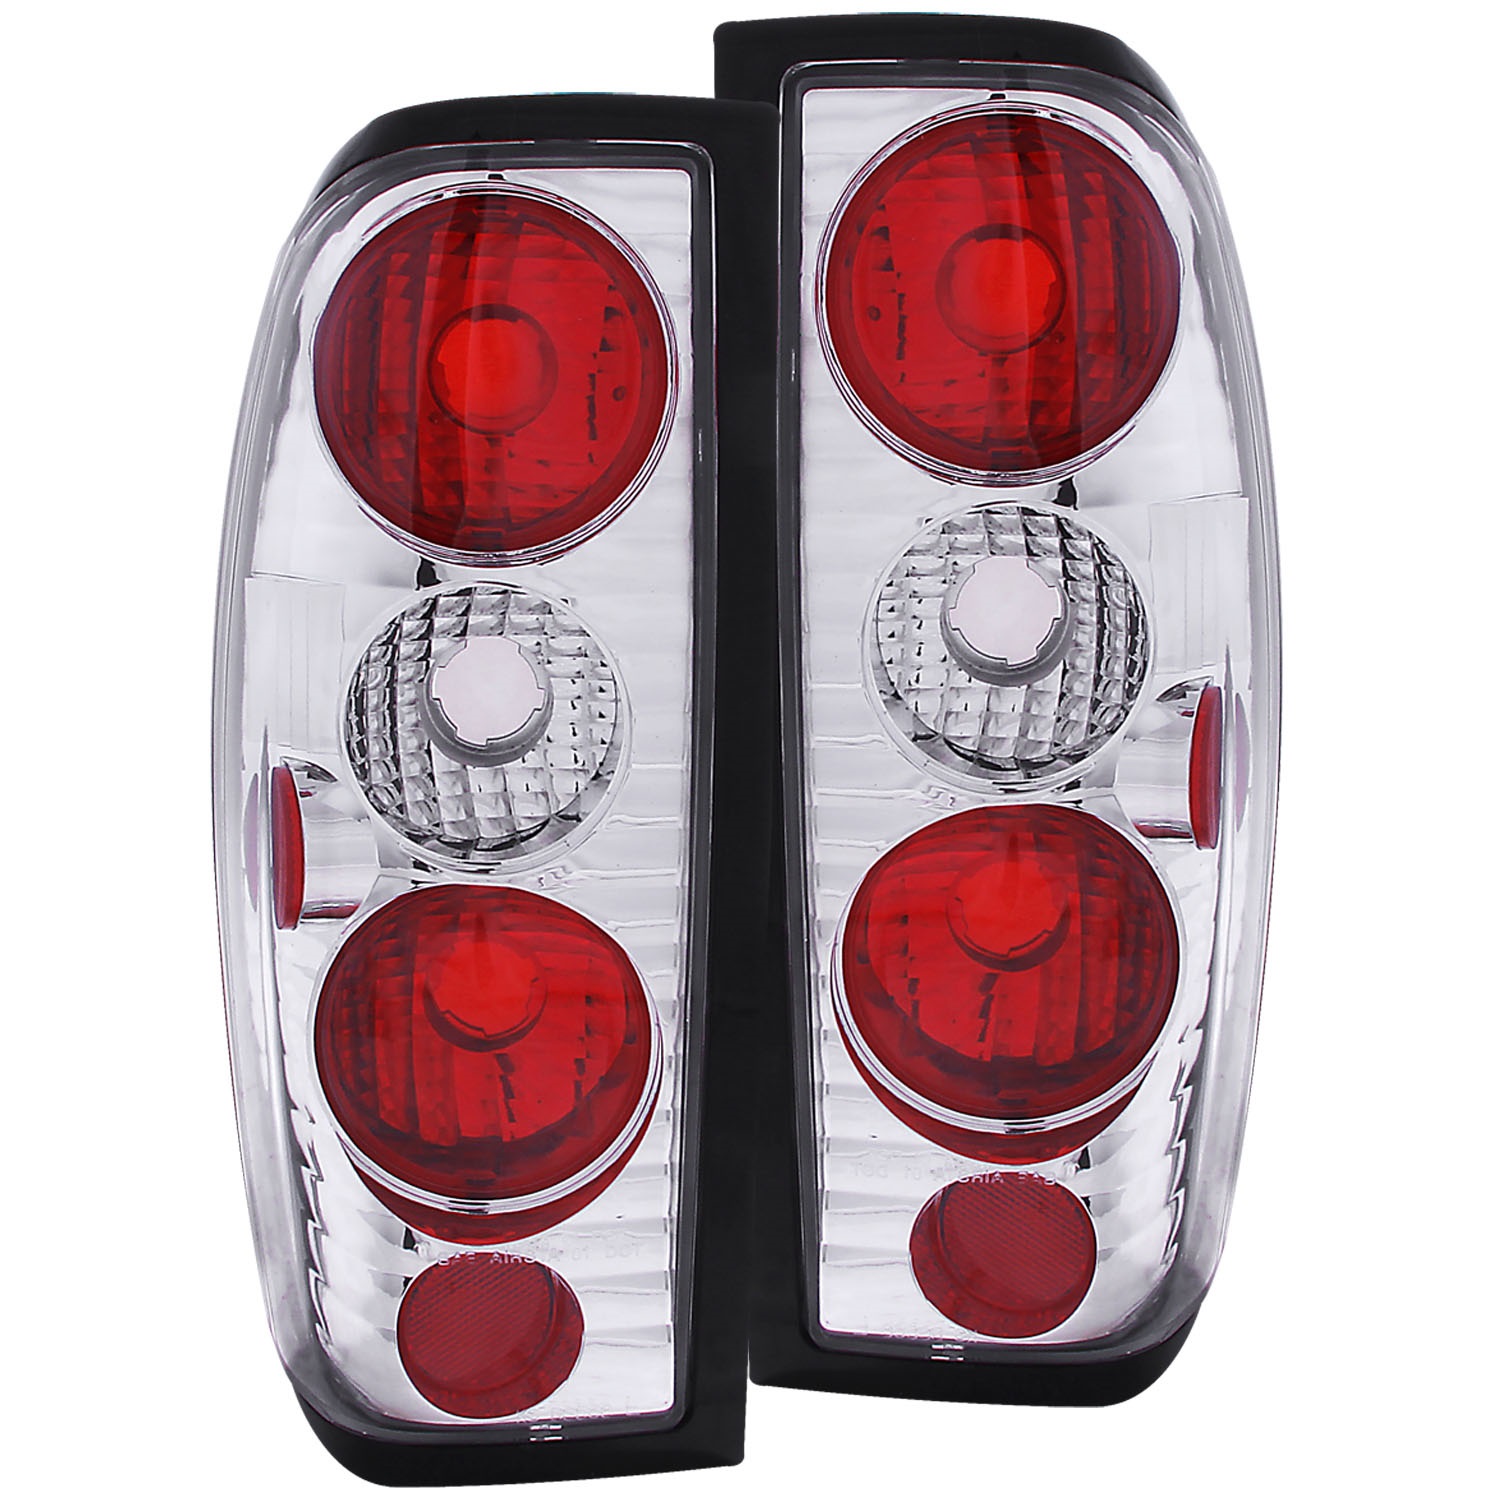 Anzo USA Anzo USA 211114 Tail Light Assembly Fits 98-04 Frontier